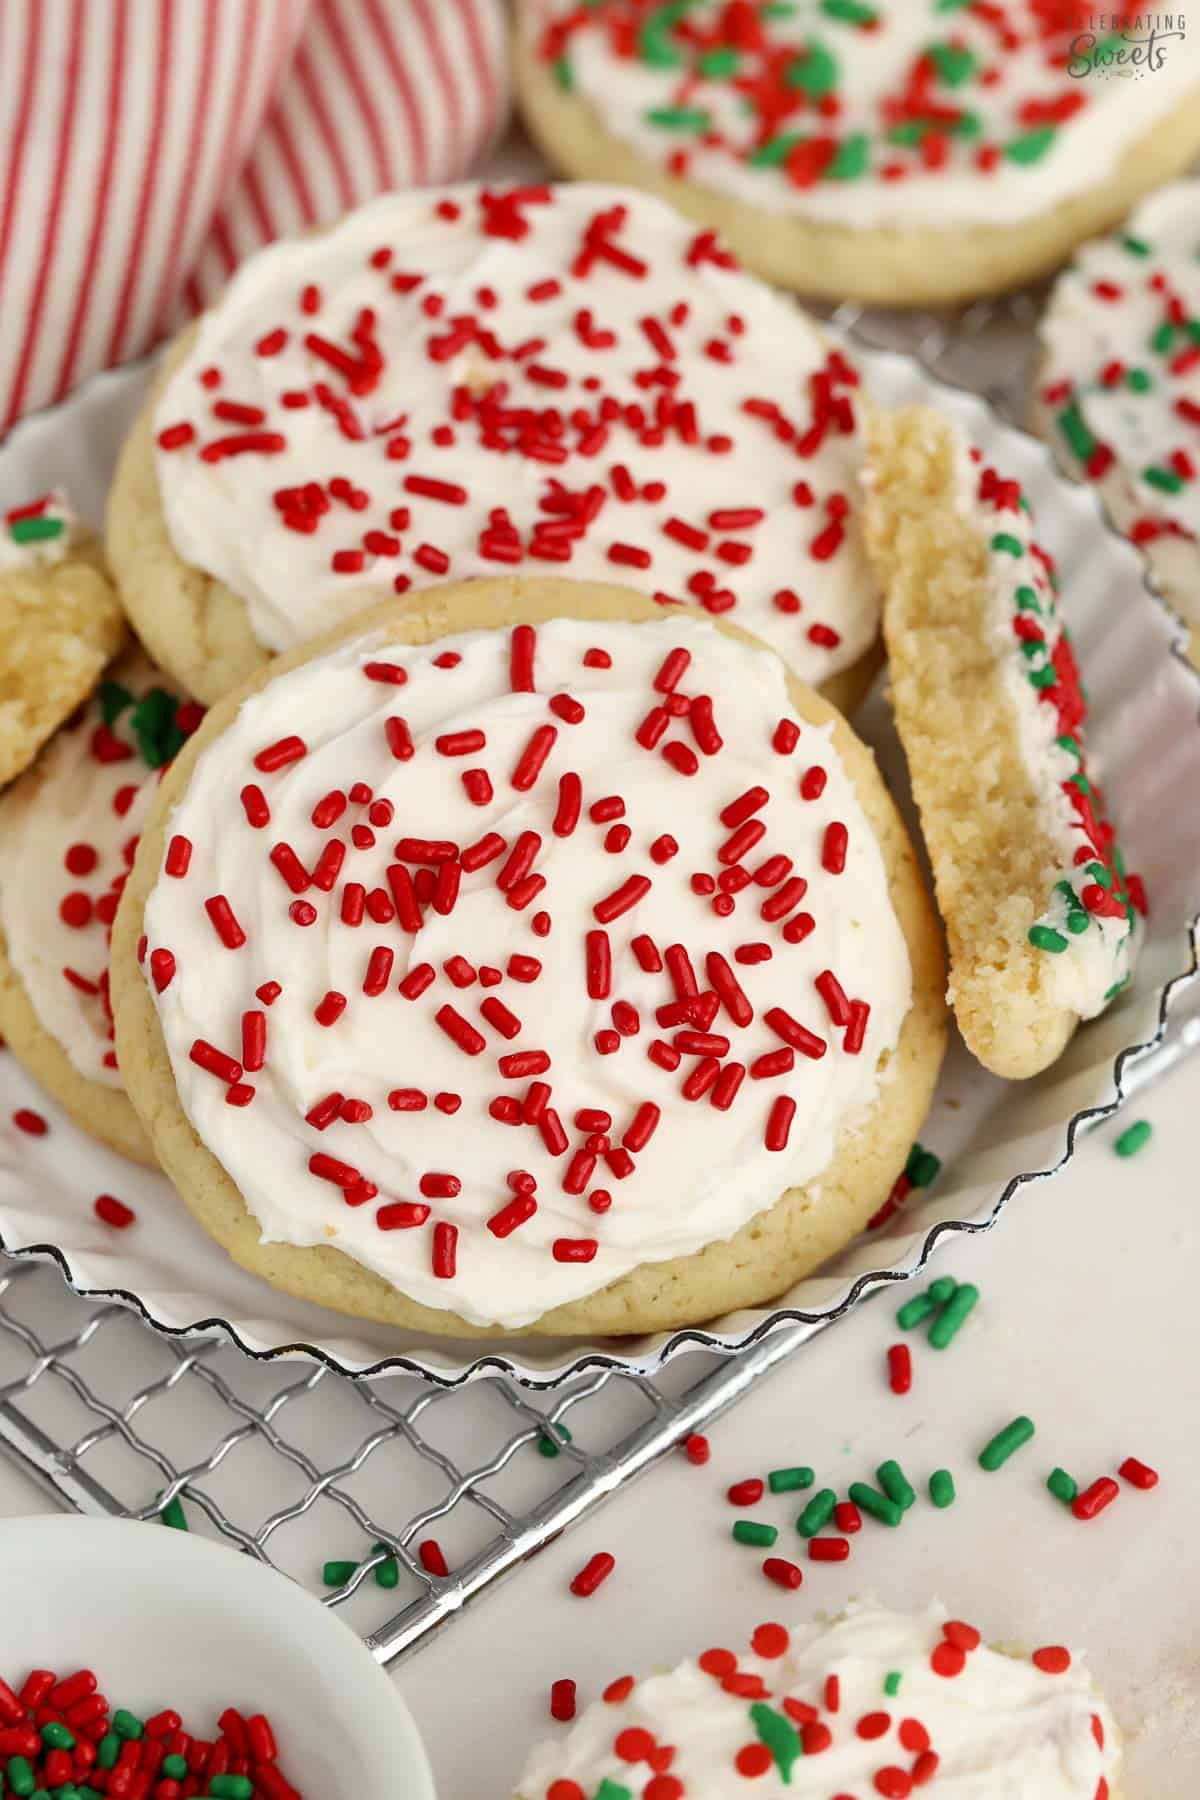 Sugar cookies topped with white frosting and red and green sprinkles on a wire rack.